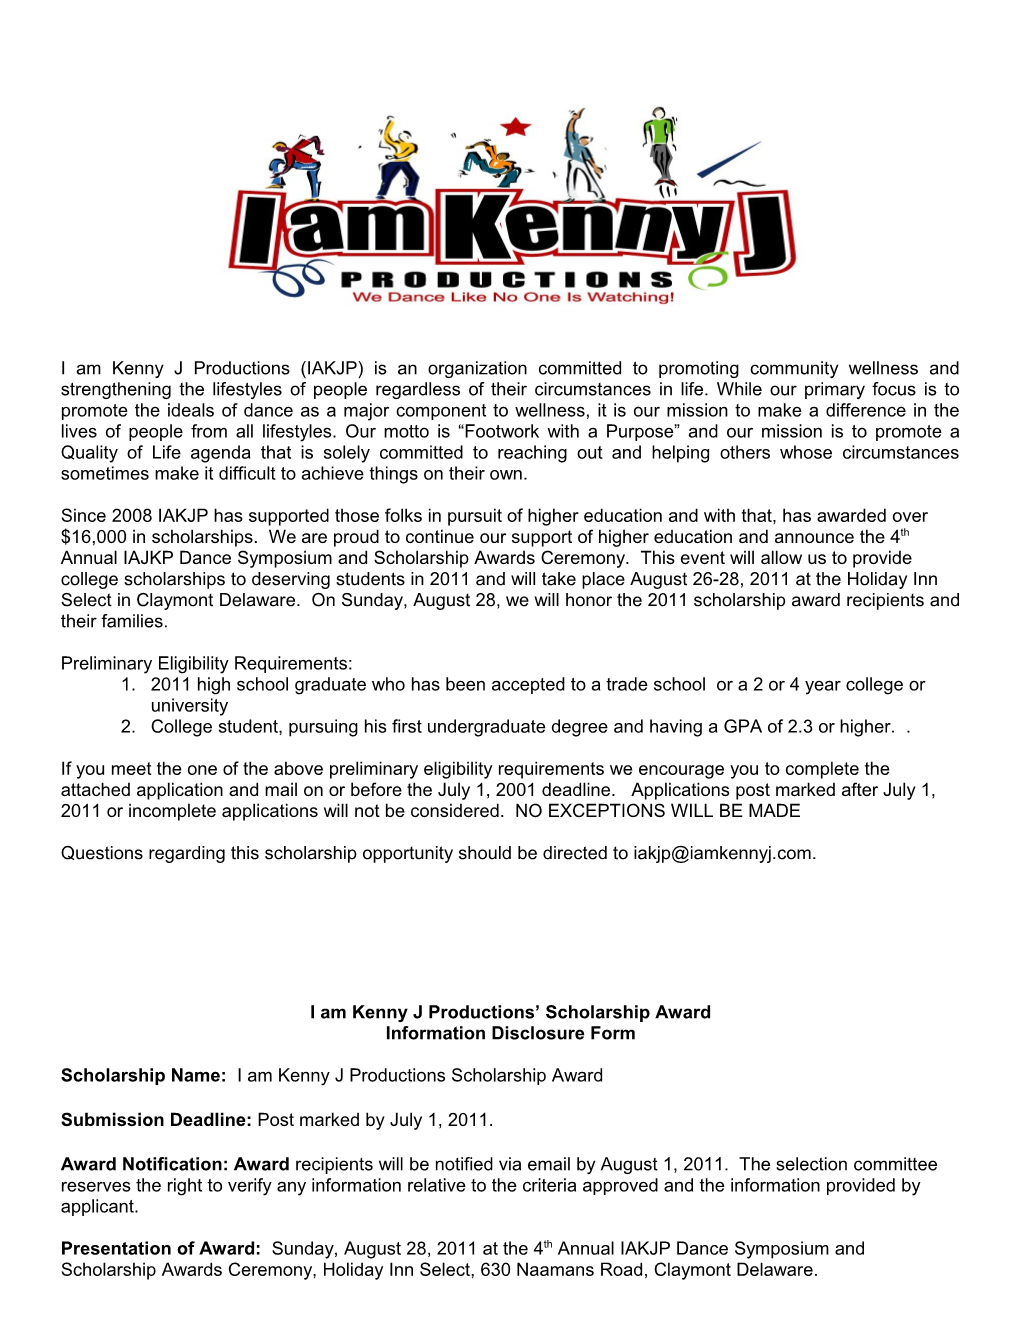 The I Am Kenny J Productions Scholarship Application